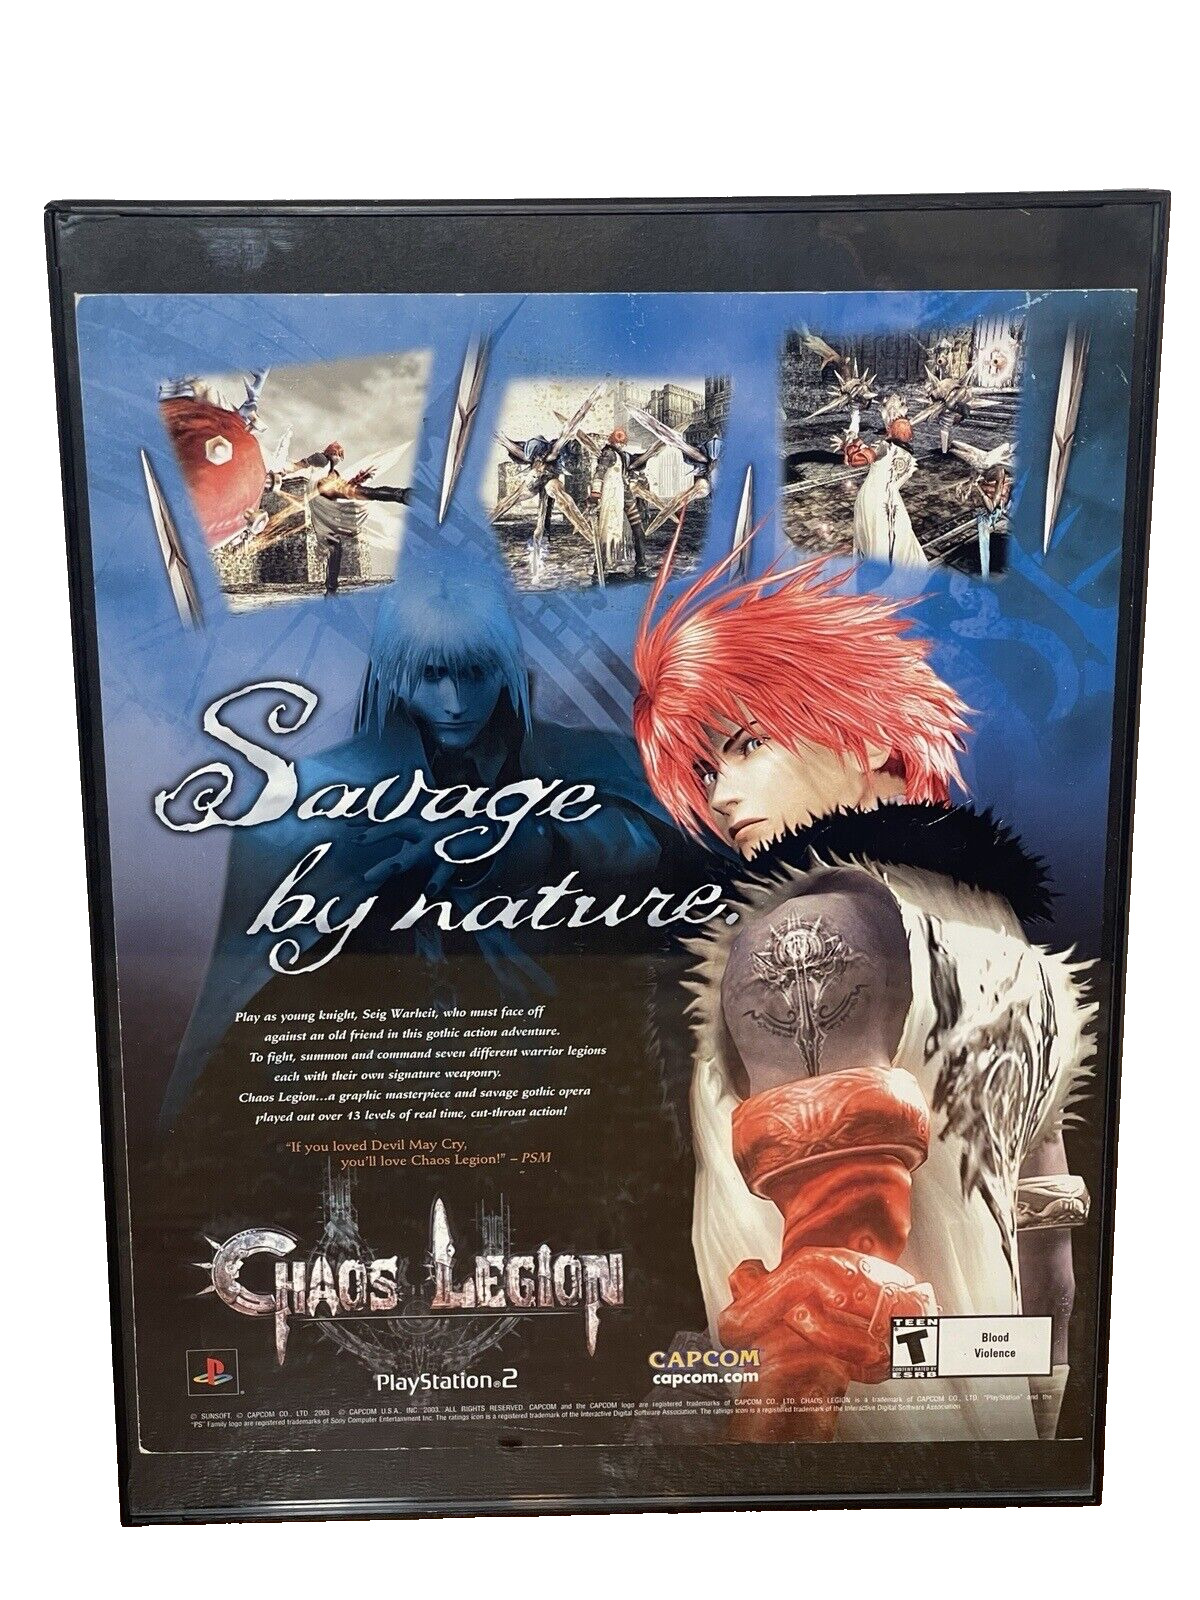 2003 Chaos Legion Framed Print Ad/Poster PS2 Playstation 2 Official Promo Art